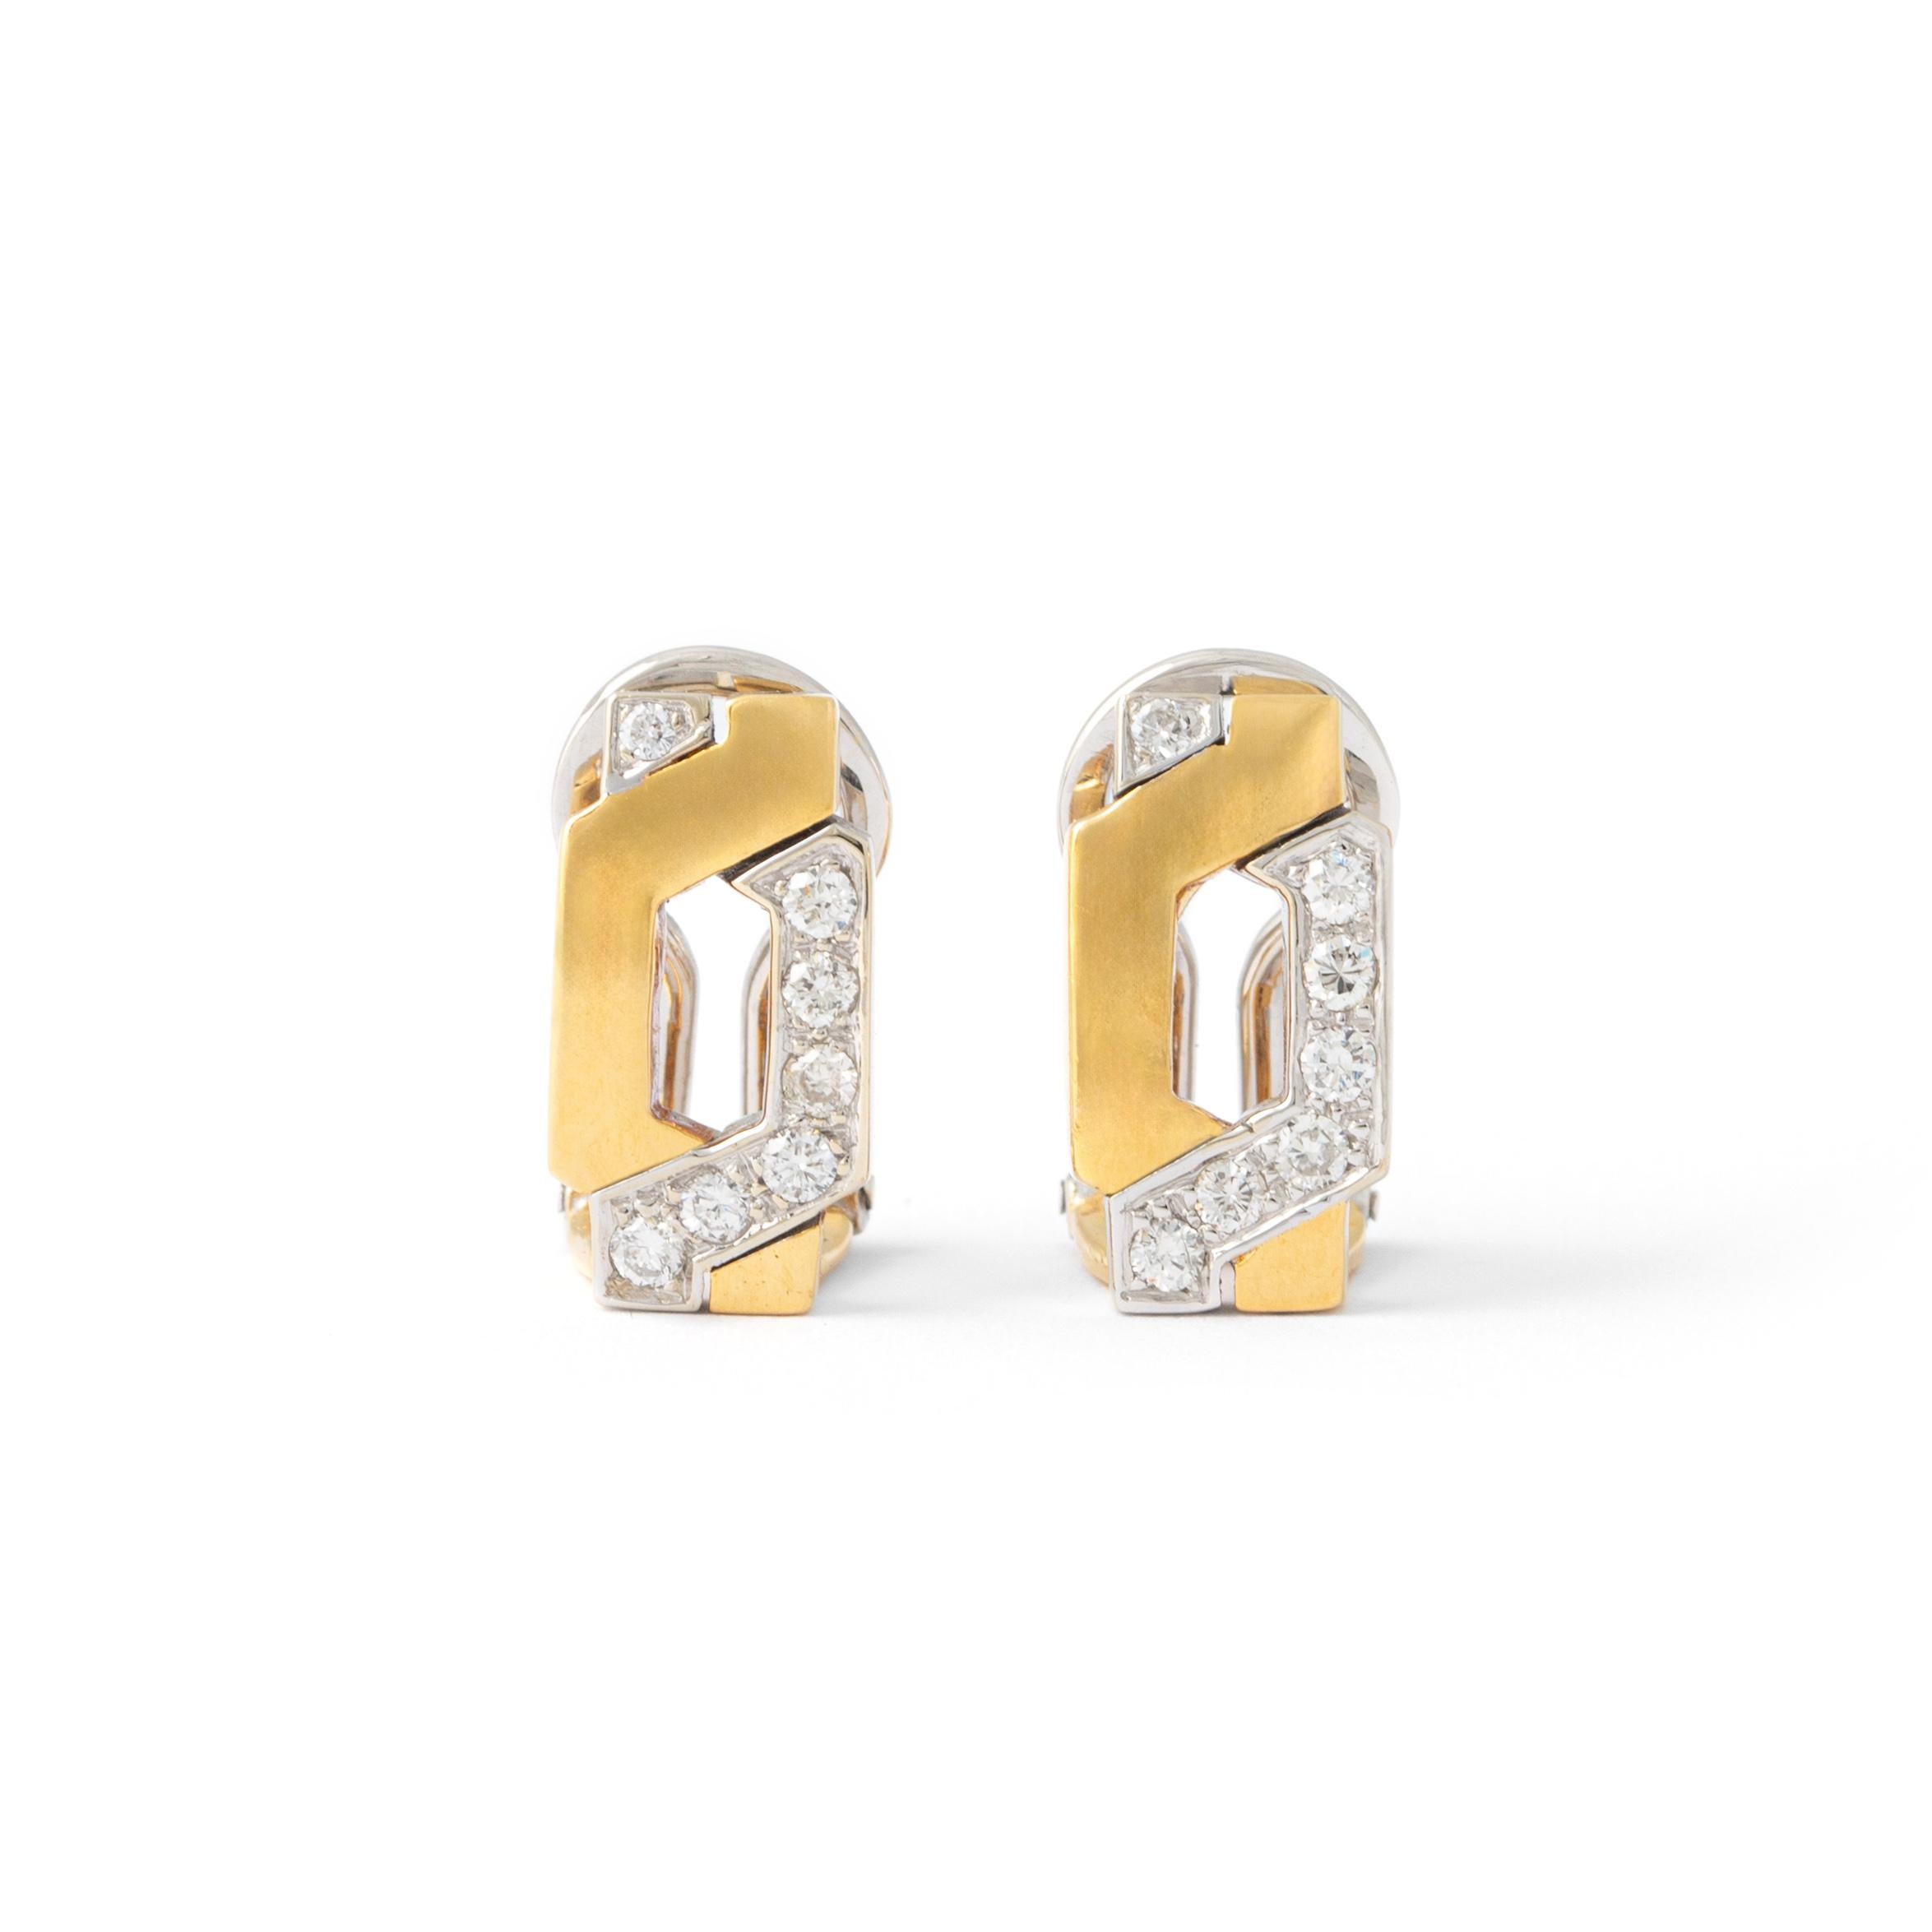 Introducing our Diamond White and Yellow Gold 18K Ear Clips—an elegant fusion of sophistication and versatility. Each ear clip features 7 round-cut diamonds, totaling 0.31 carats, set in a radiant display of 18K white and yellow gold. The diamonds,